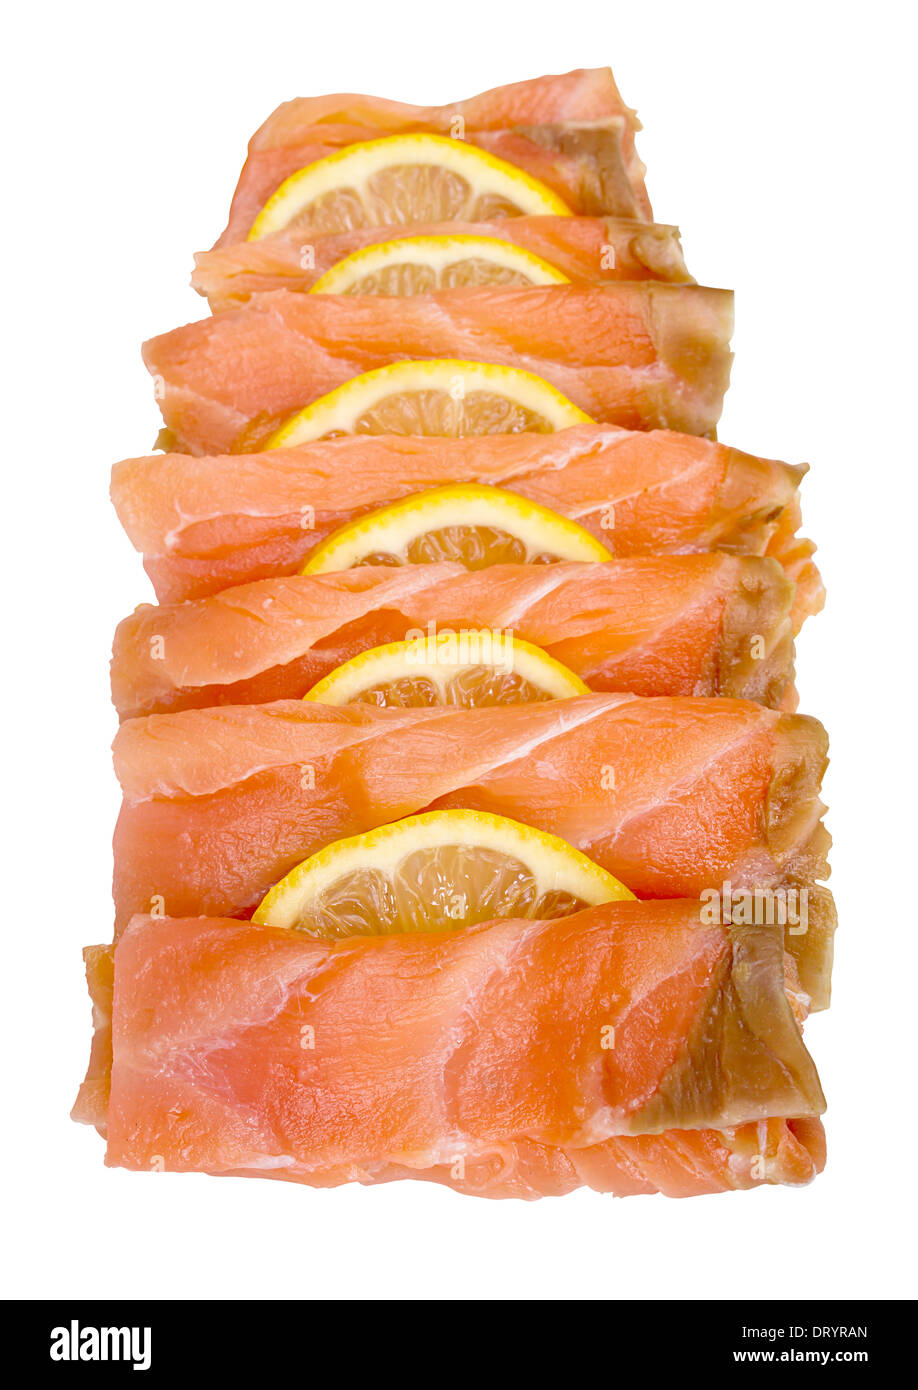 Smoked salmon sliced and arranged with lemon slices isolated against a white background Stock Photo